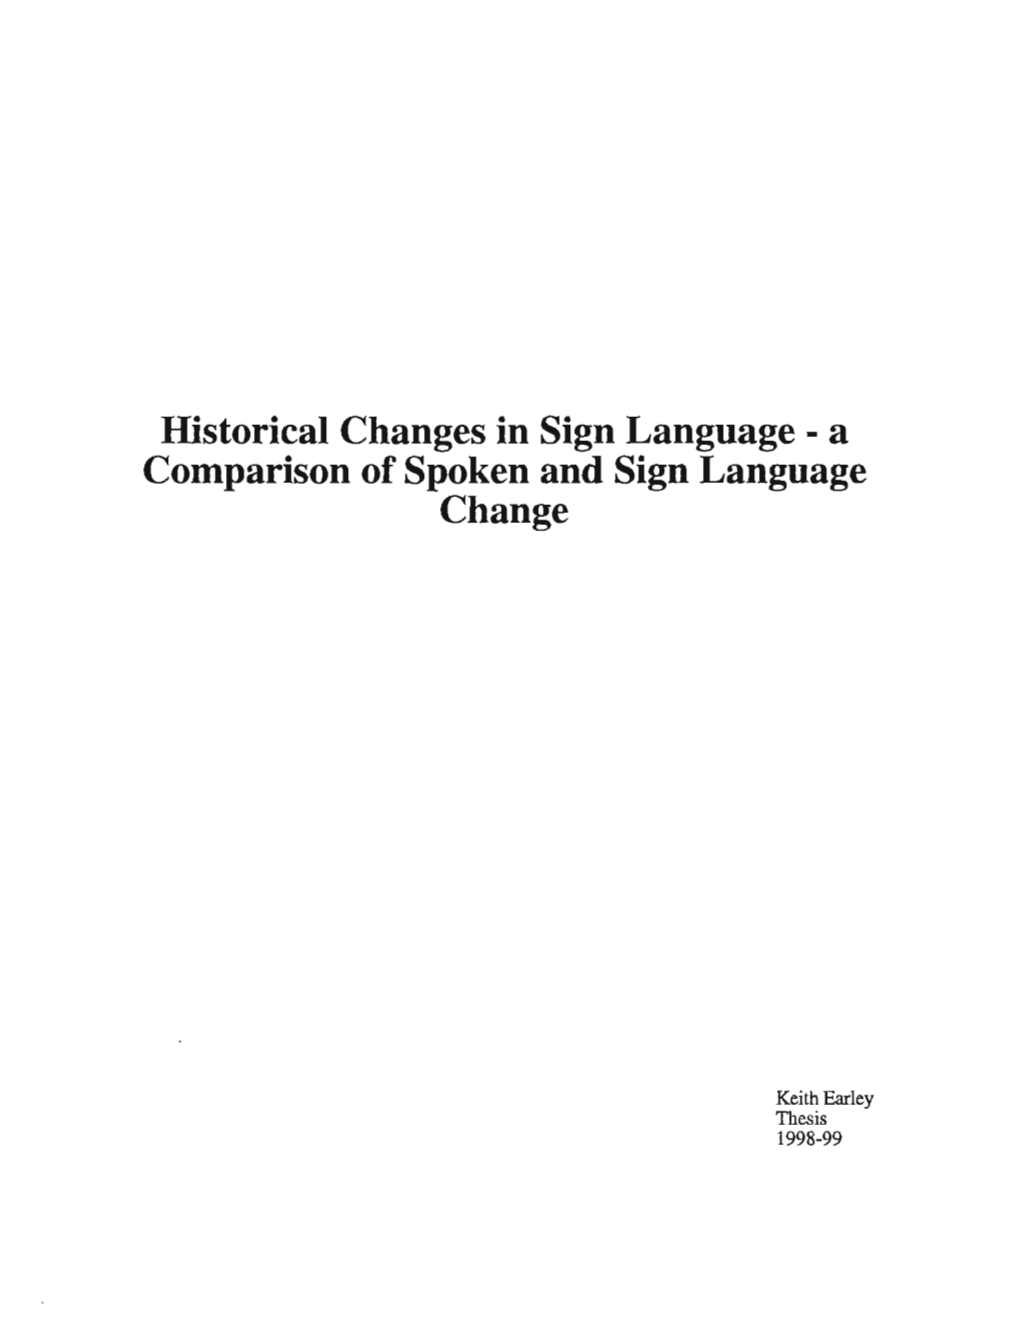 Historical Changes in Sign Language - a Comparison of Spoken and Sign Language Change